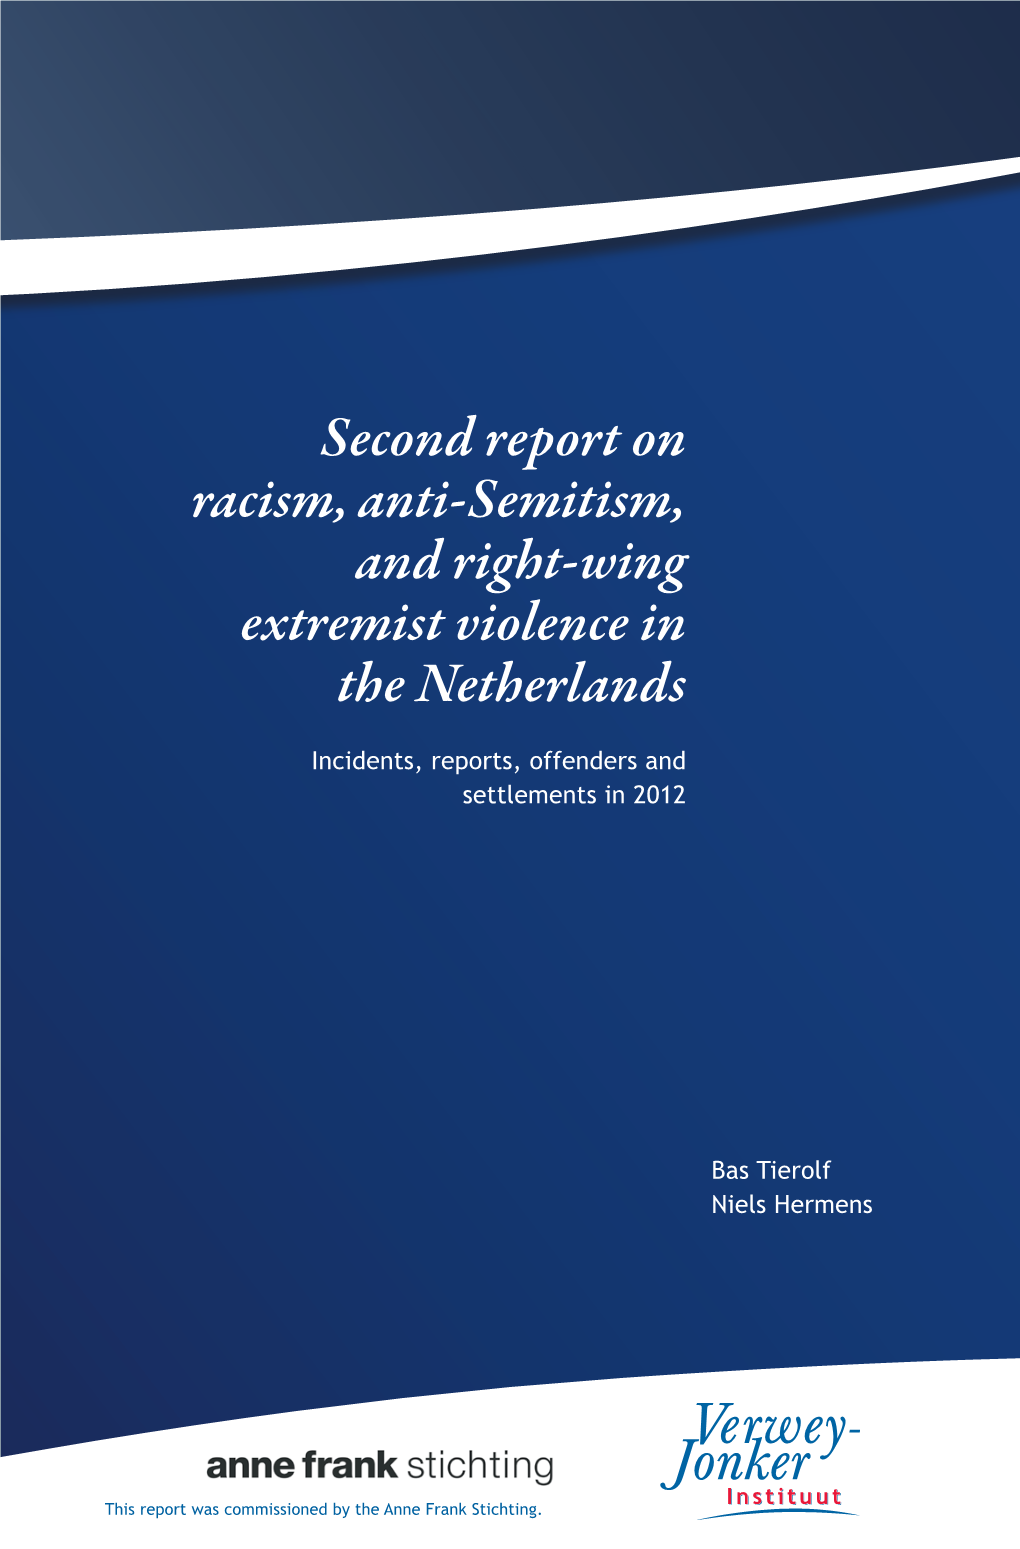 Second Report on Racism, Anti-Semitism, and Right-Wing Extremist Violence in the Netherlands